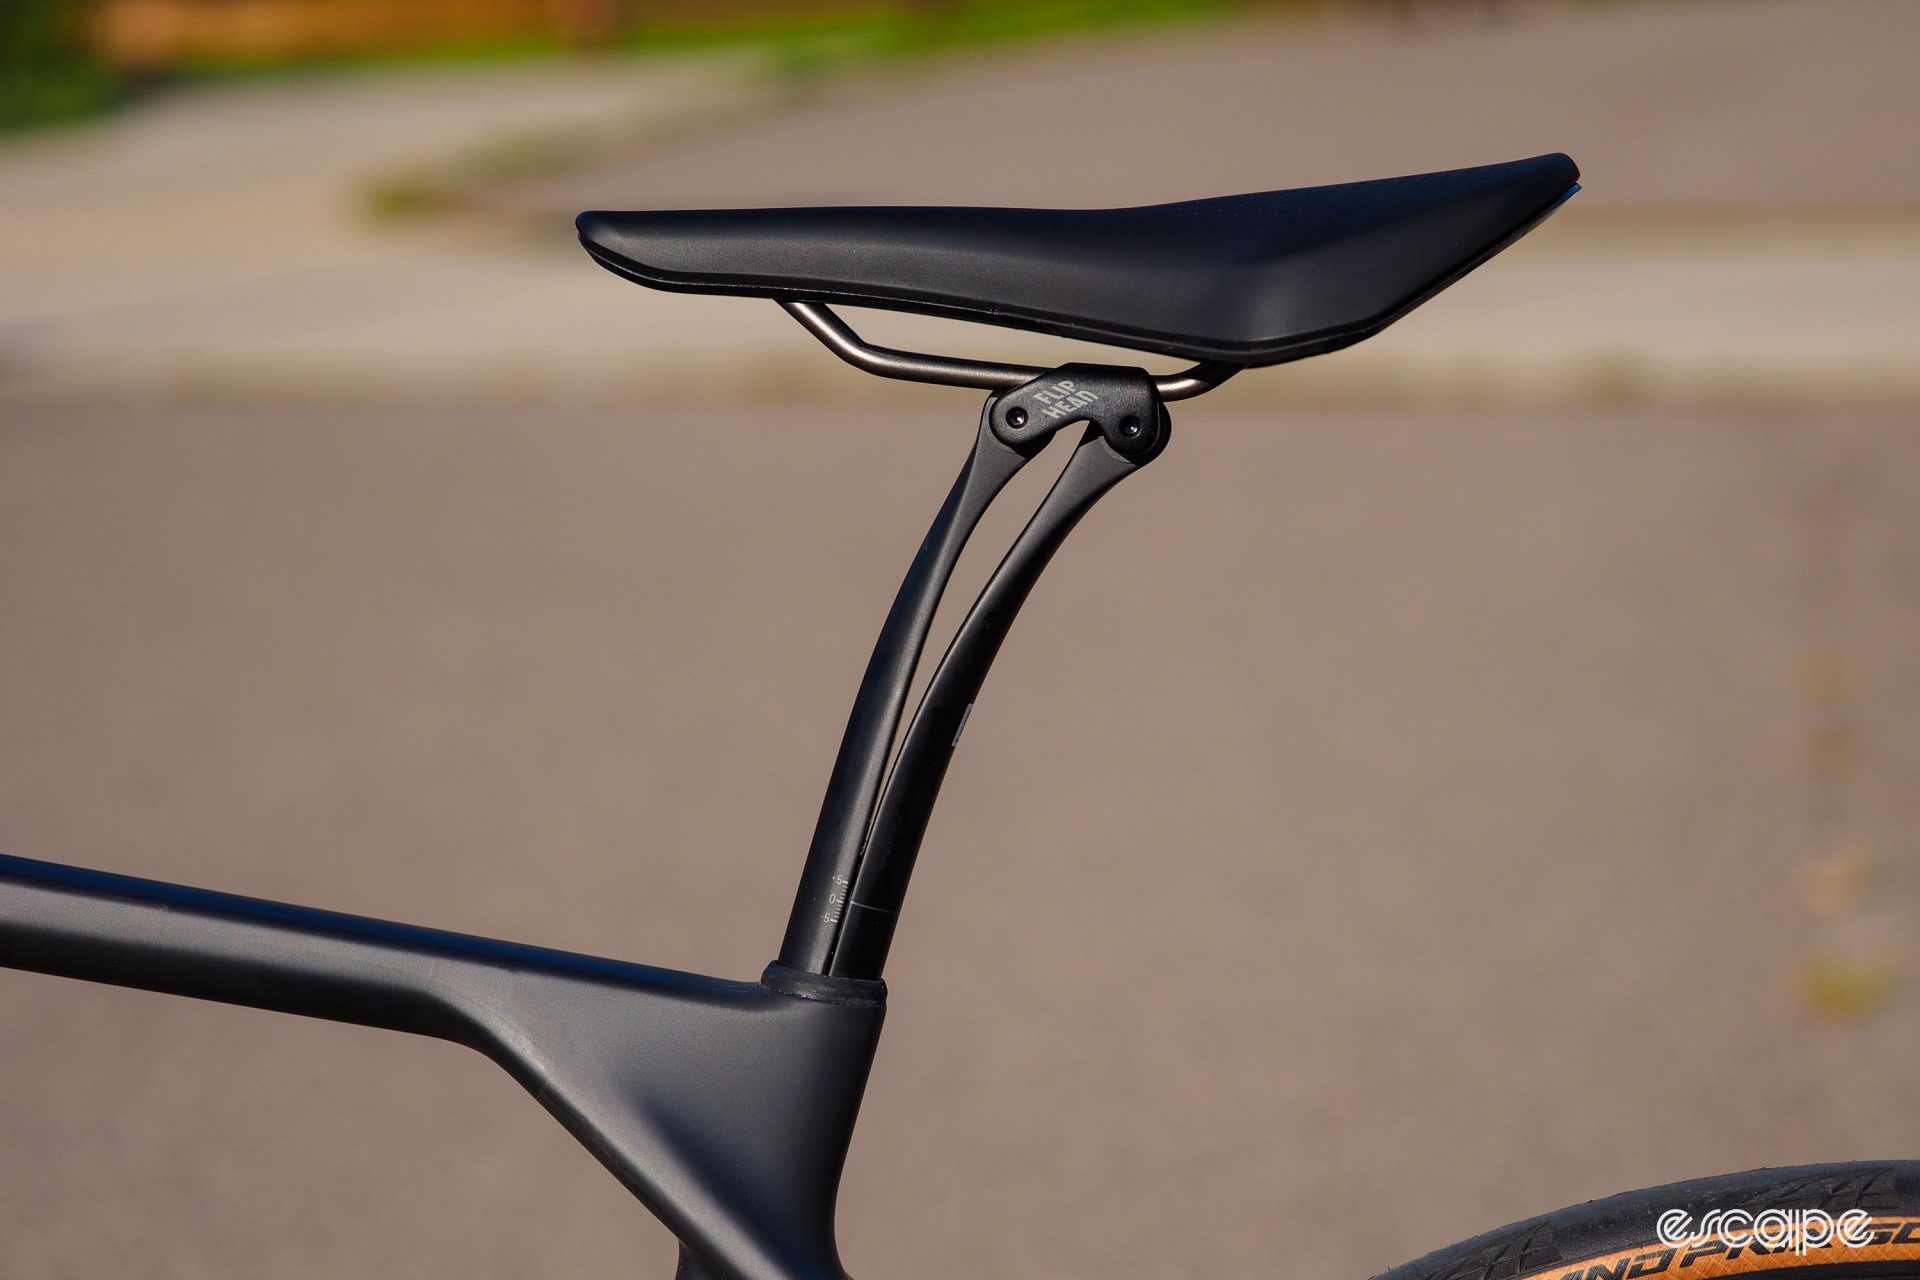 Canyon's VCLS carbon fiber seatpost uses a two-piece, leaf-spring design to offer a bit of flex under load to help improve ride quality.